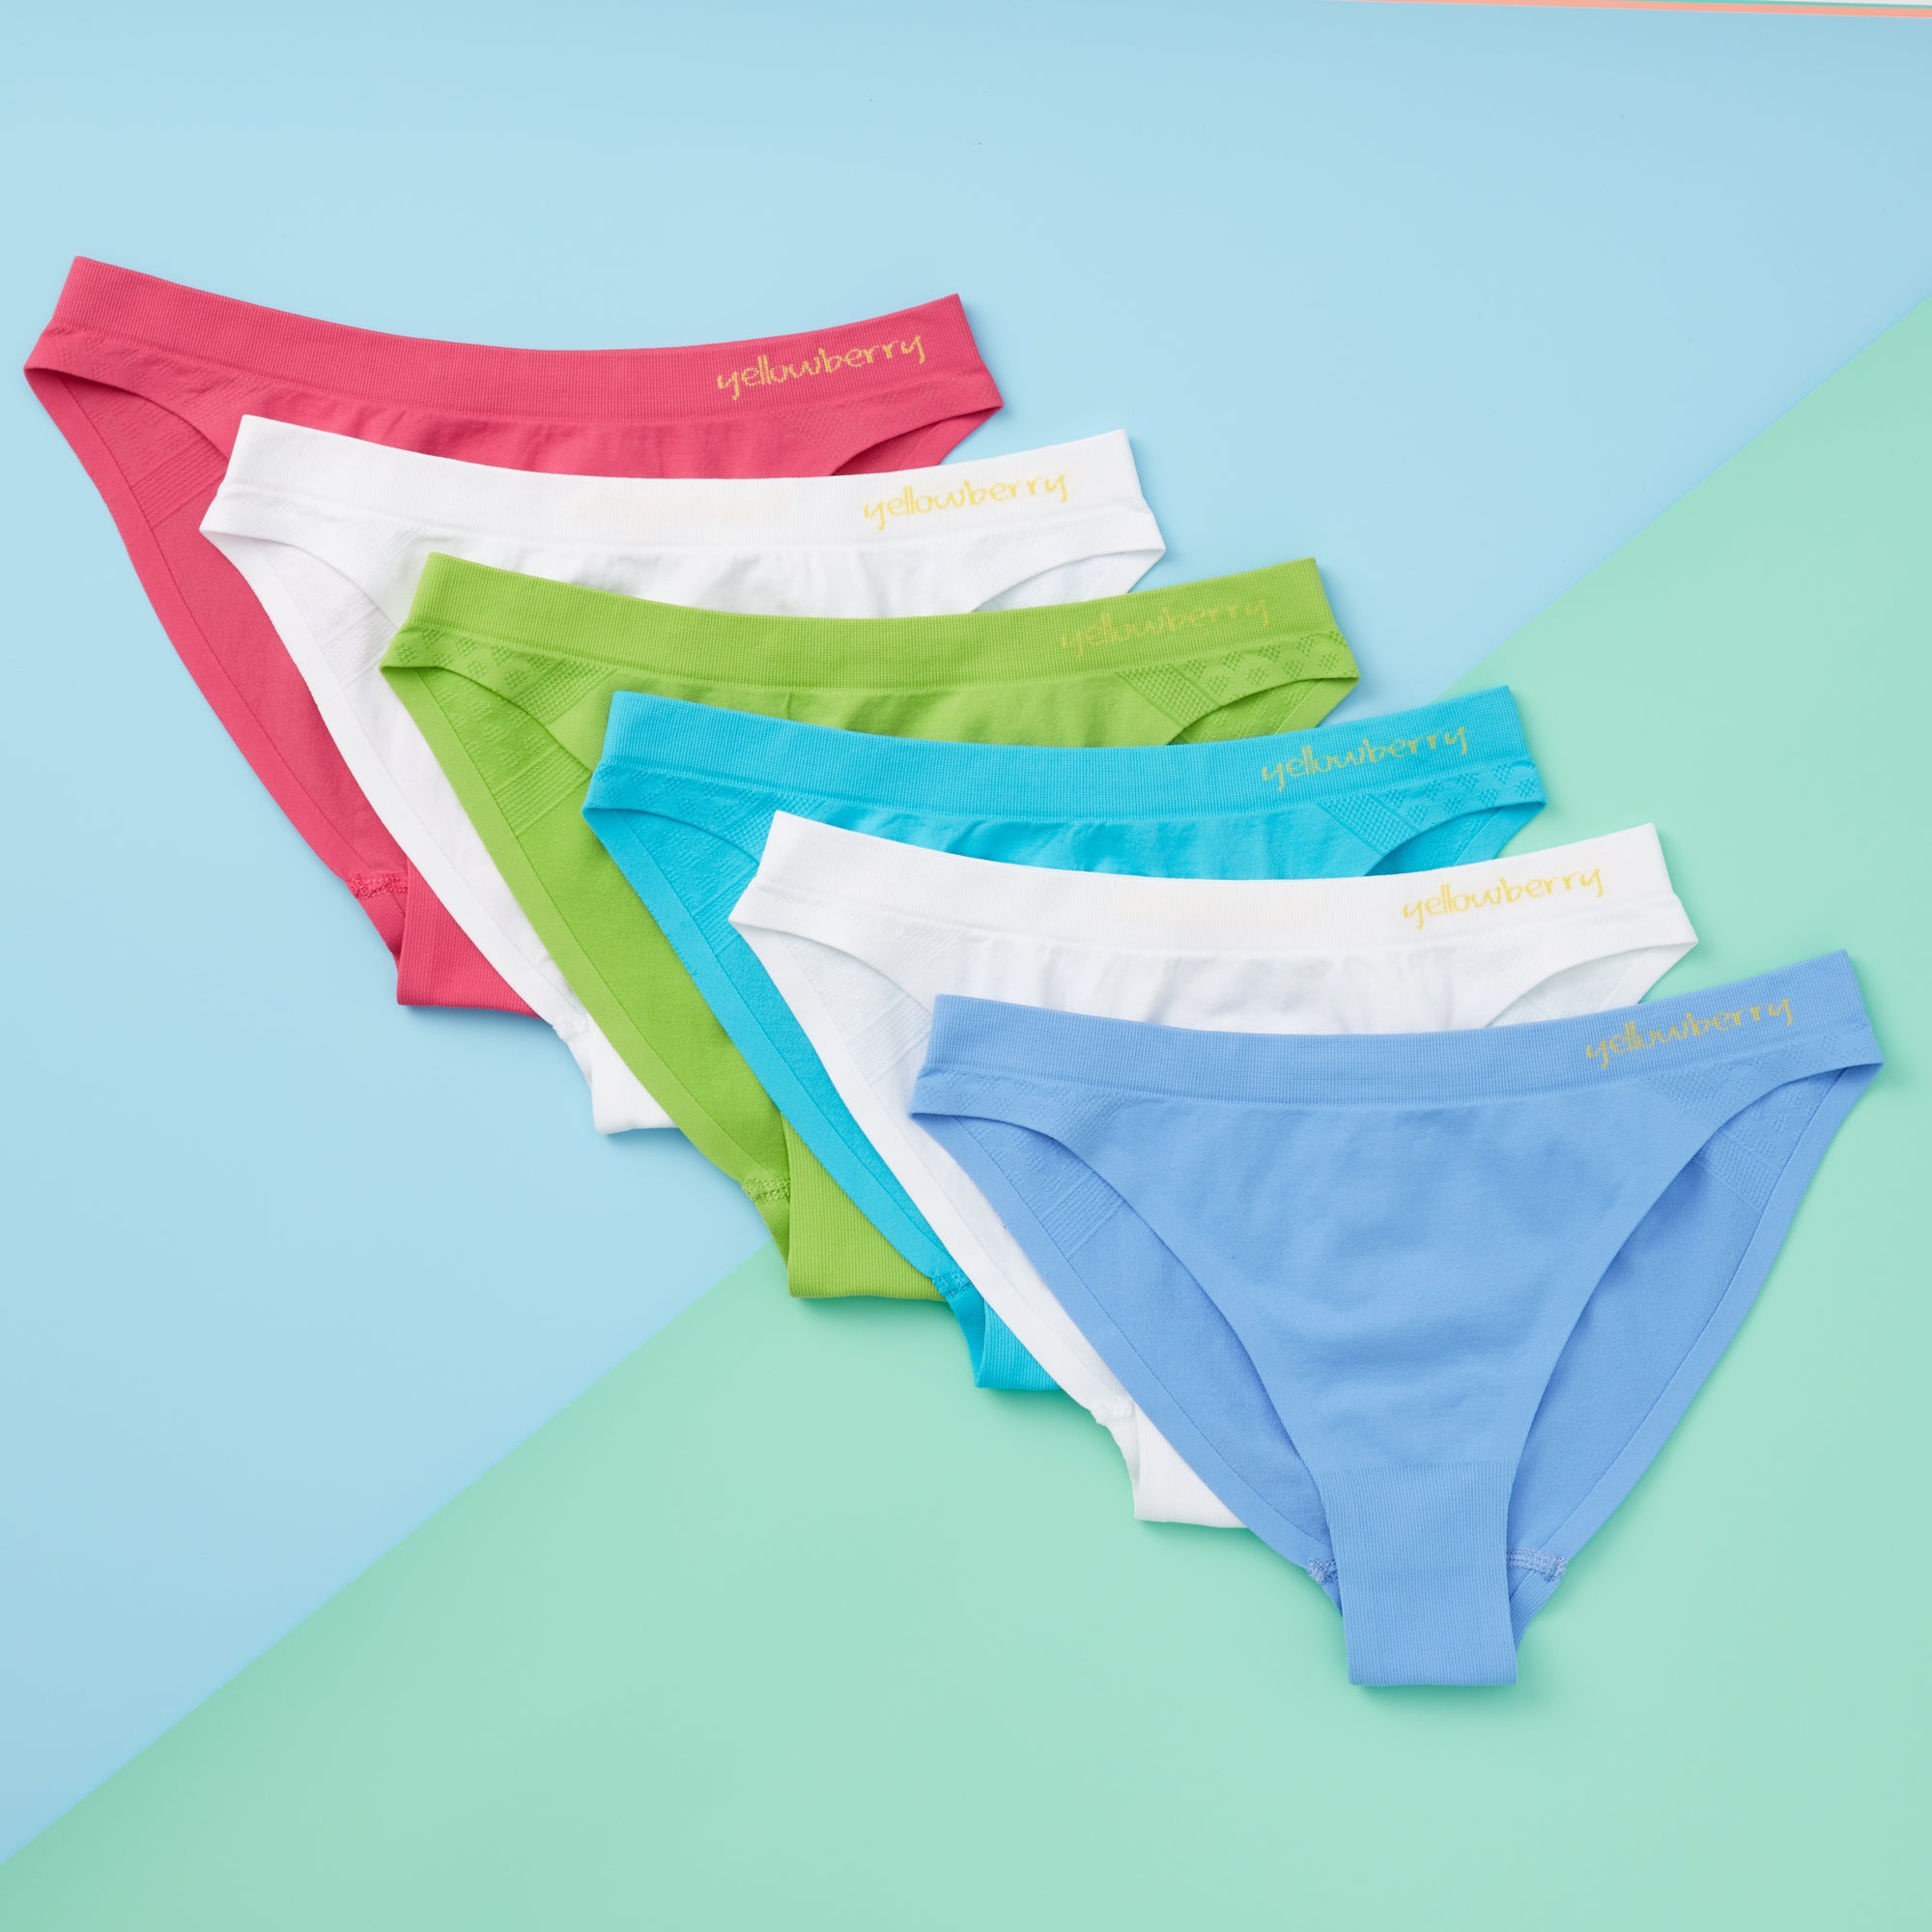 How to Wash and Care for Seamless Underwear